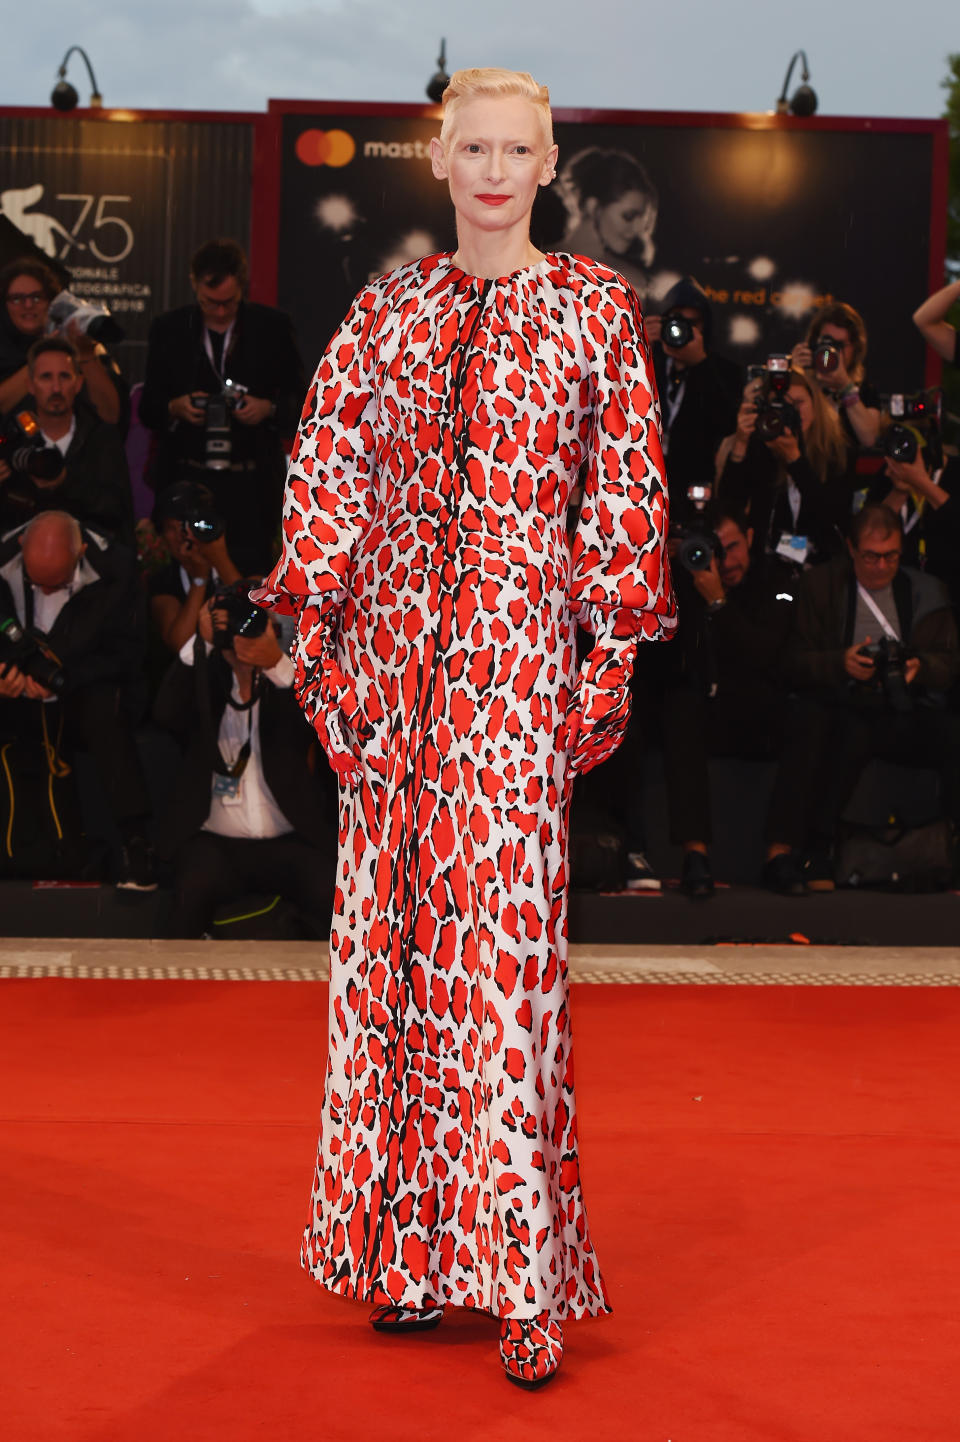 Tilda Swinton at the ‘At Eternity’s Gate’ screening during the 75th Venice Film Festival